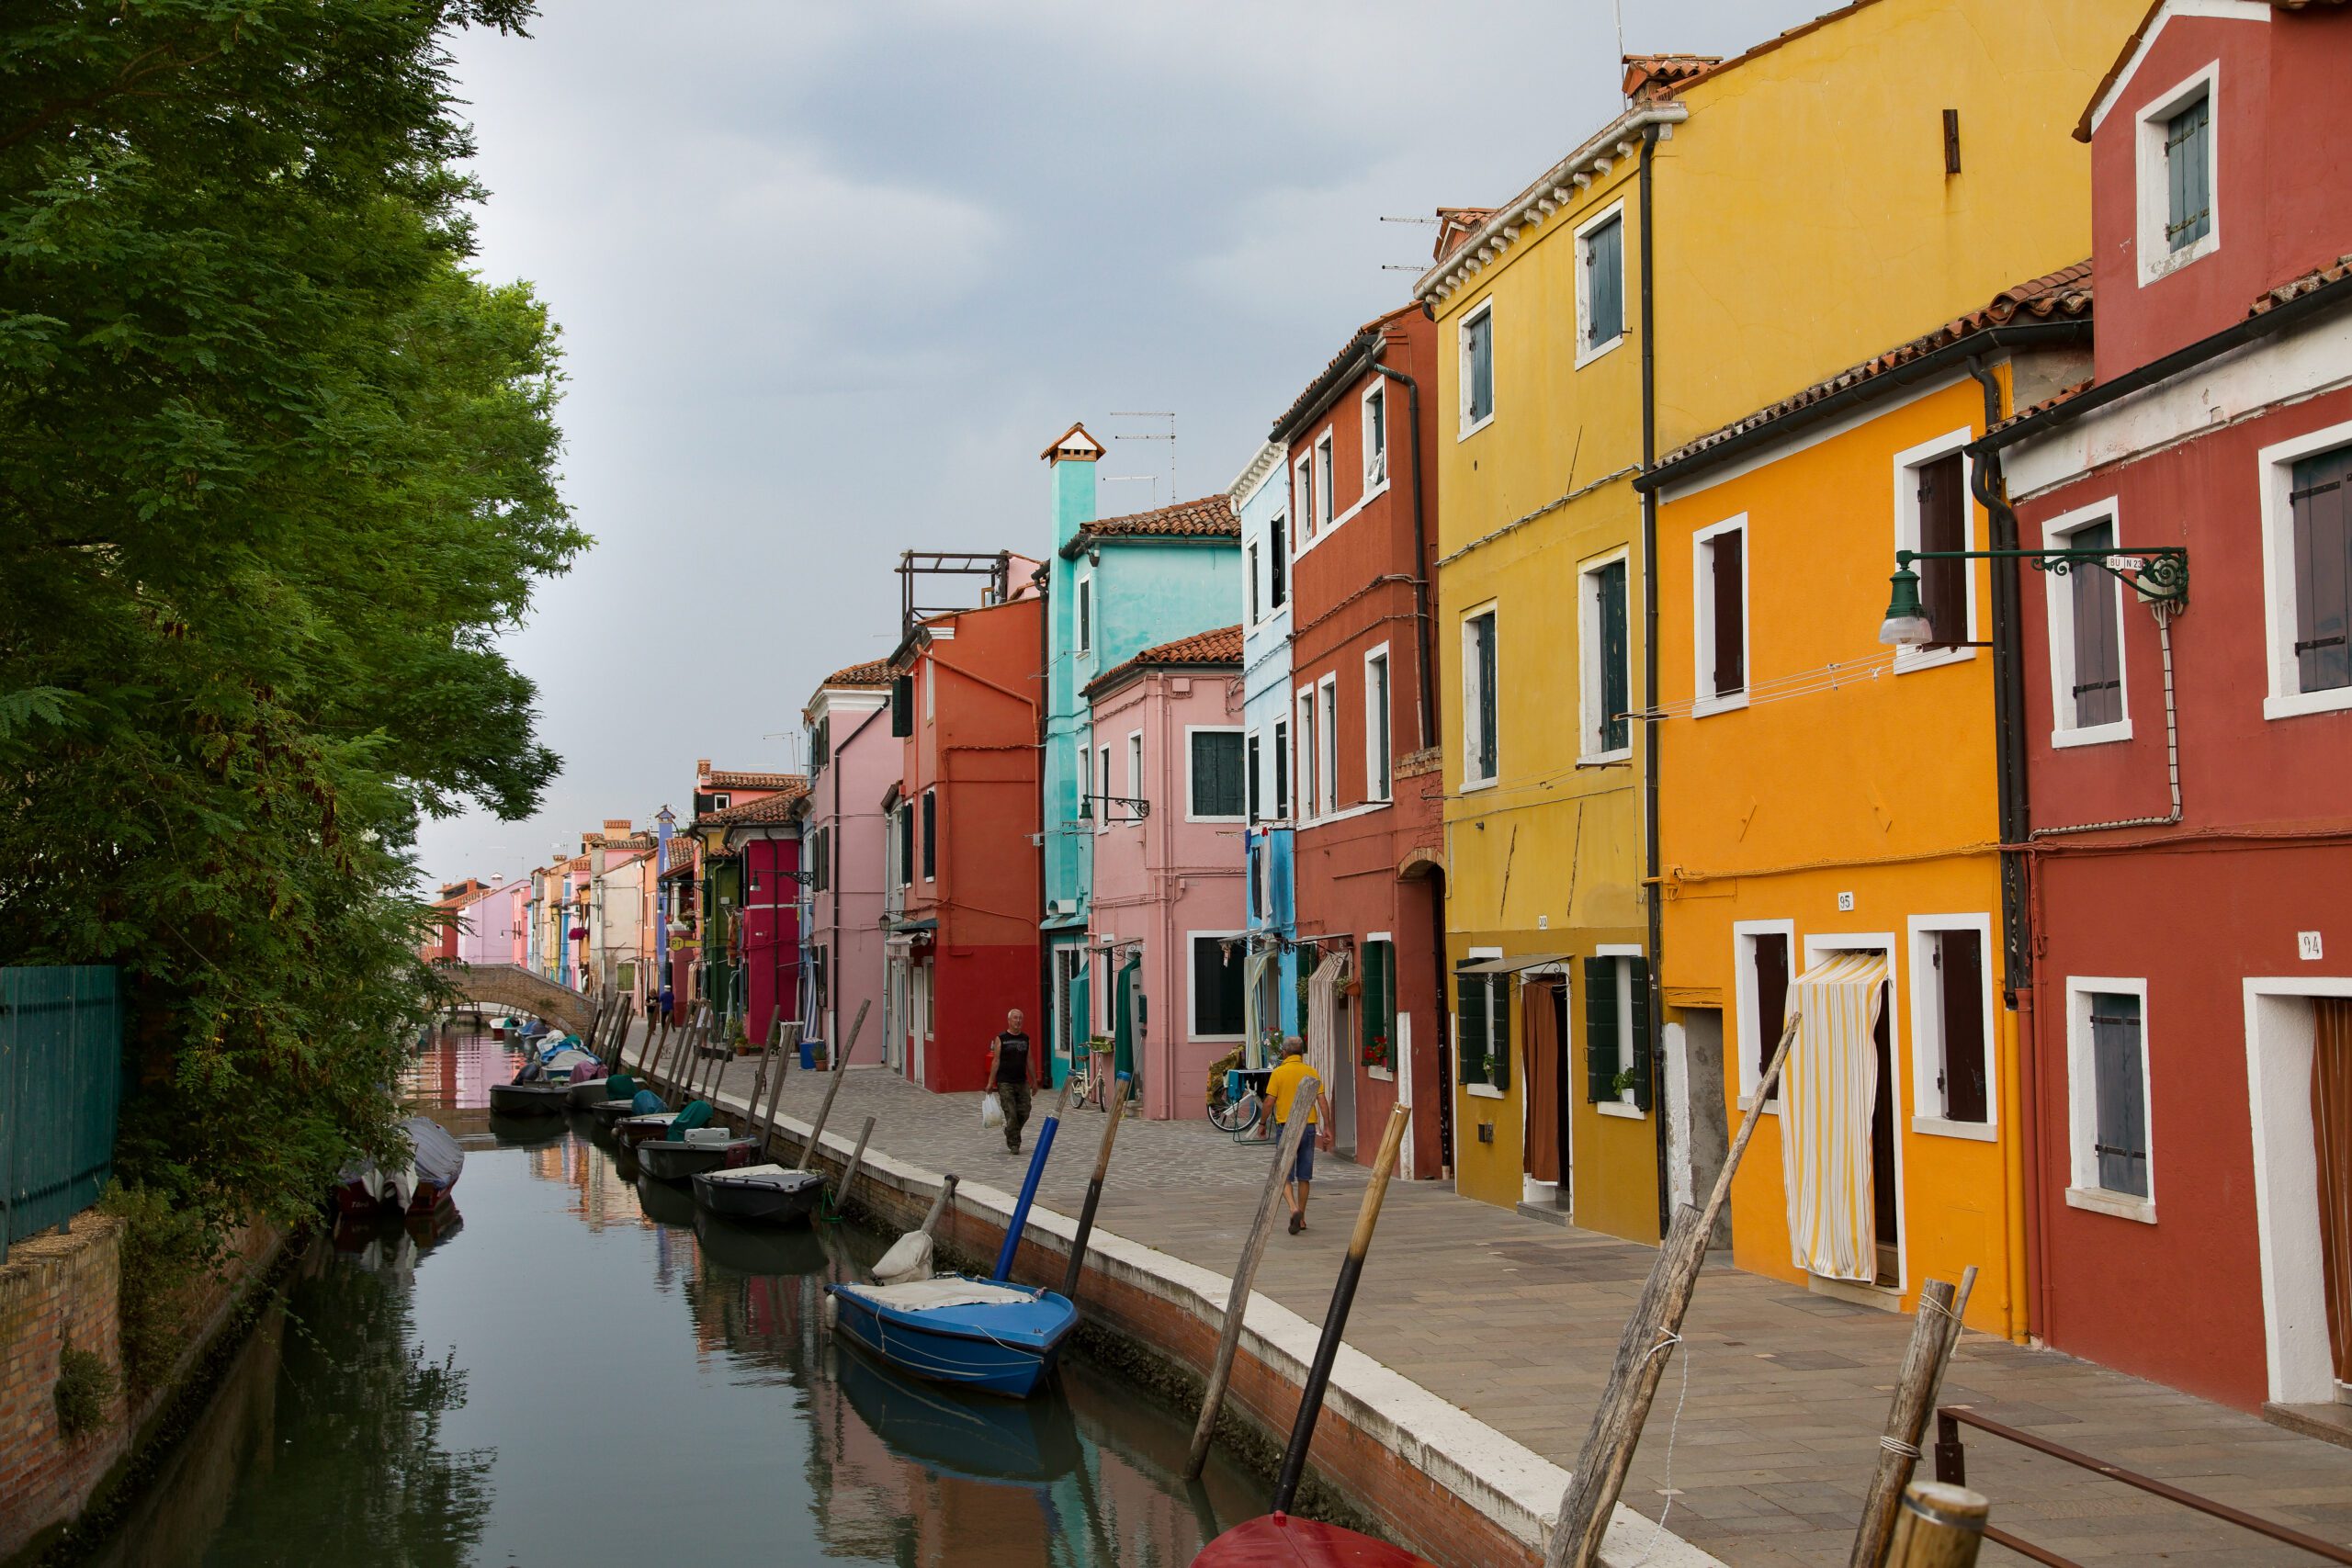 The colorful island of Burano, Italy